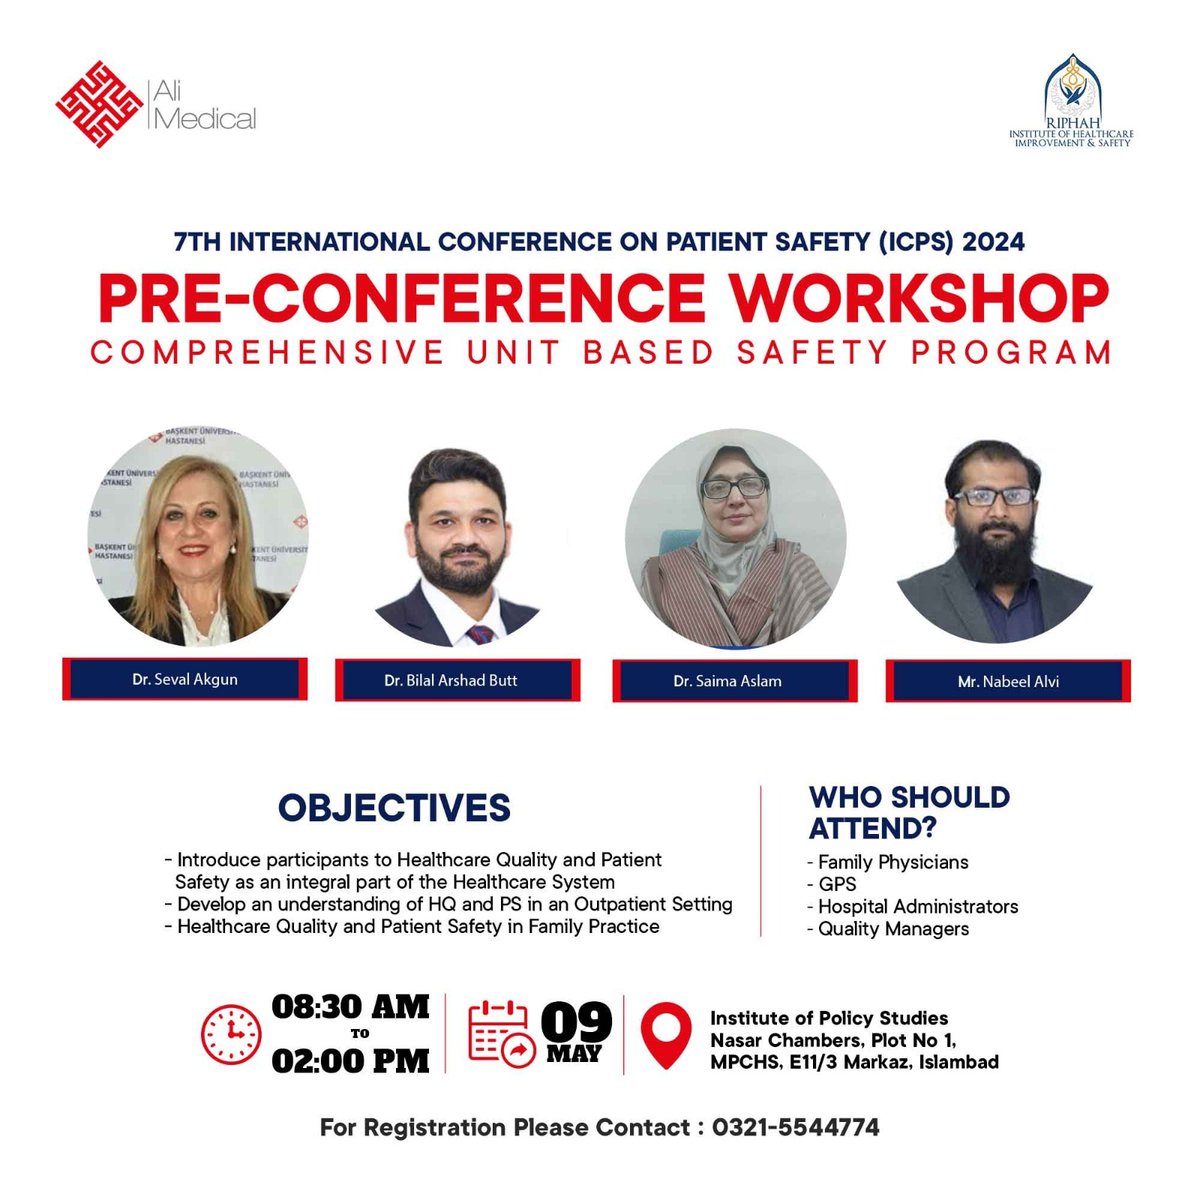 Join us for our pre-conference #workshop on May 9th, 2024, from 8:30 AM to 2:00 PM at the Institute of Policy Studies in Islamabad. 🌍 as part of 7th International Conference on #PatientSafety (ICPS) 2024. For more details: fb.me/e/dB41qBBJw
#icps  #Healthcaretraining